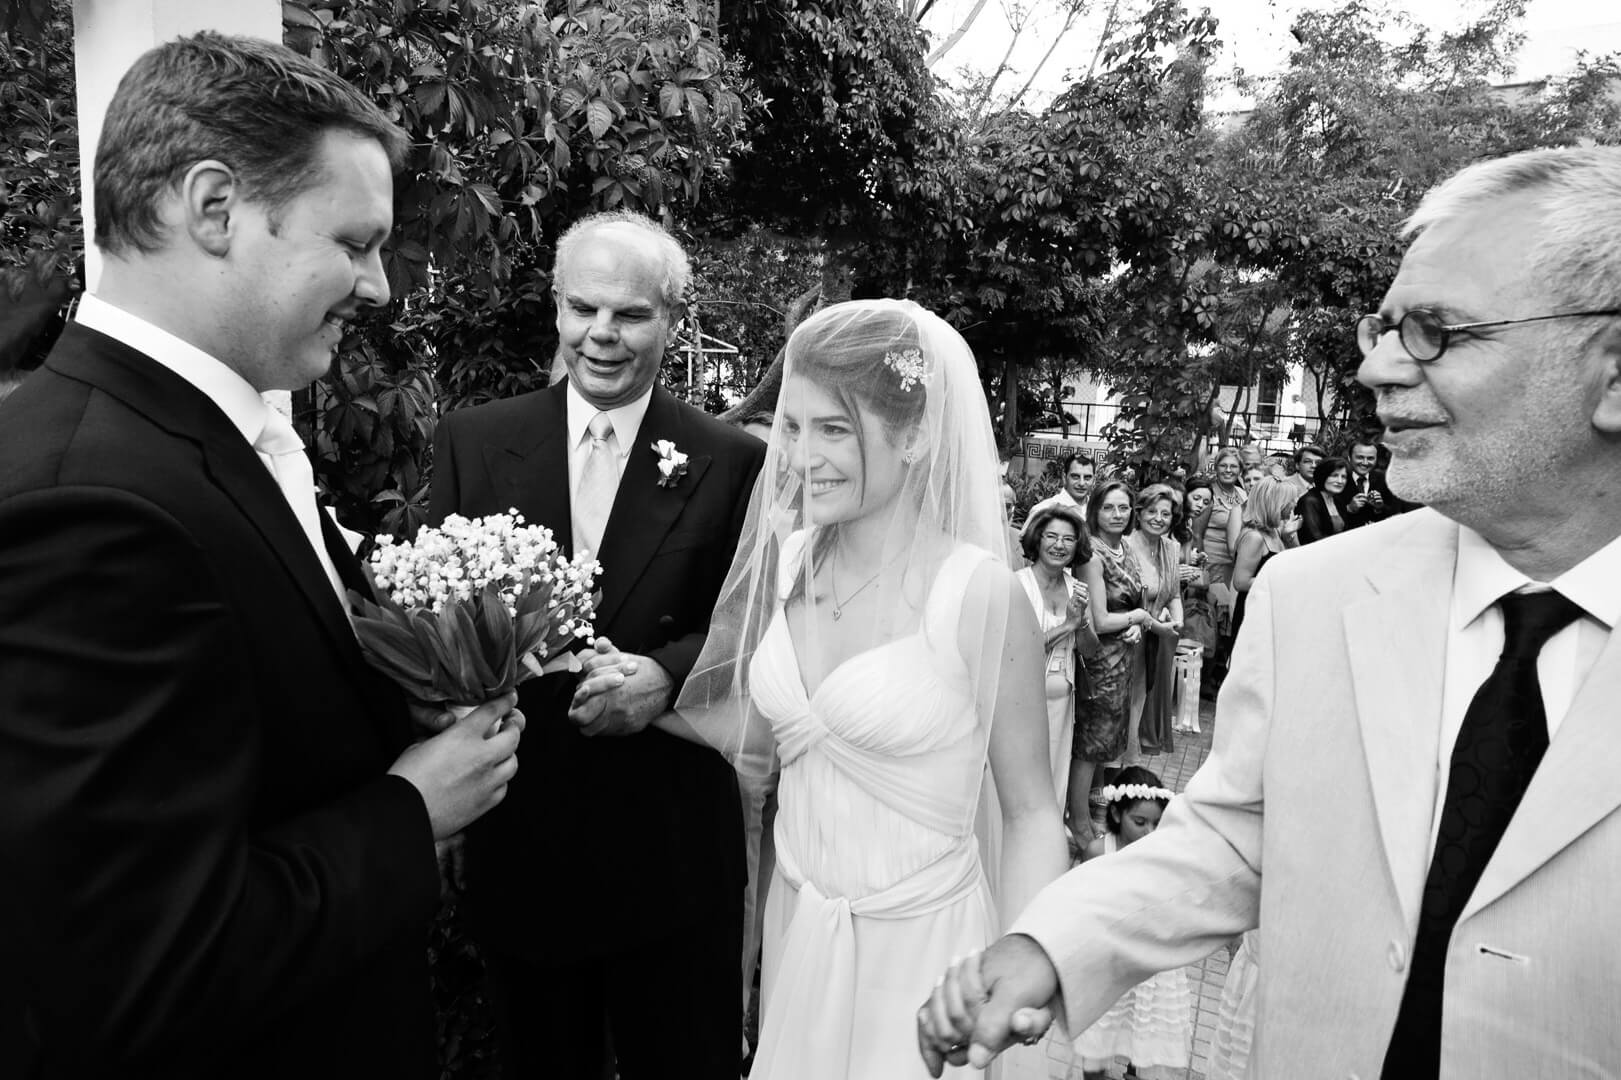 Bride radiates joy, flanked by father and stepfather, as groom presents her with a beautiful bouquet at the church entrance.